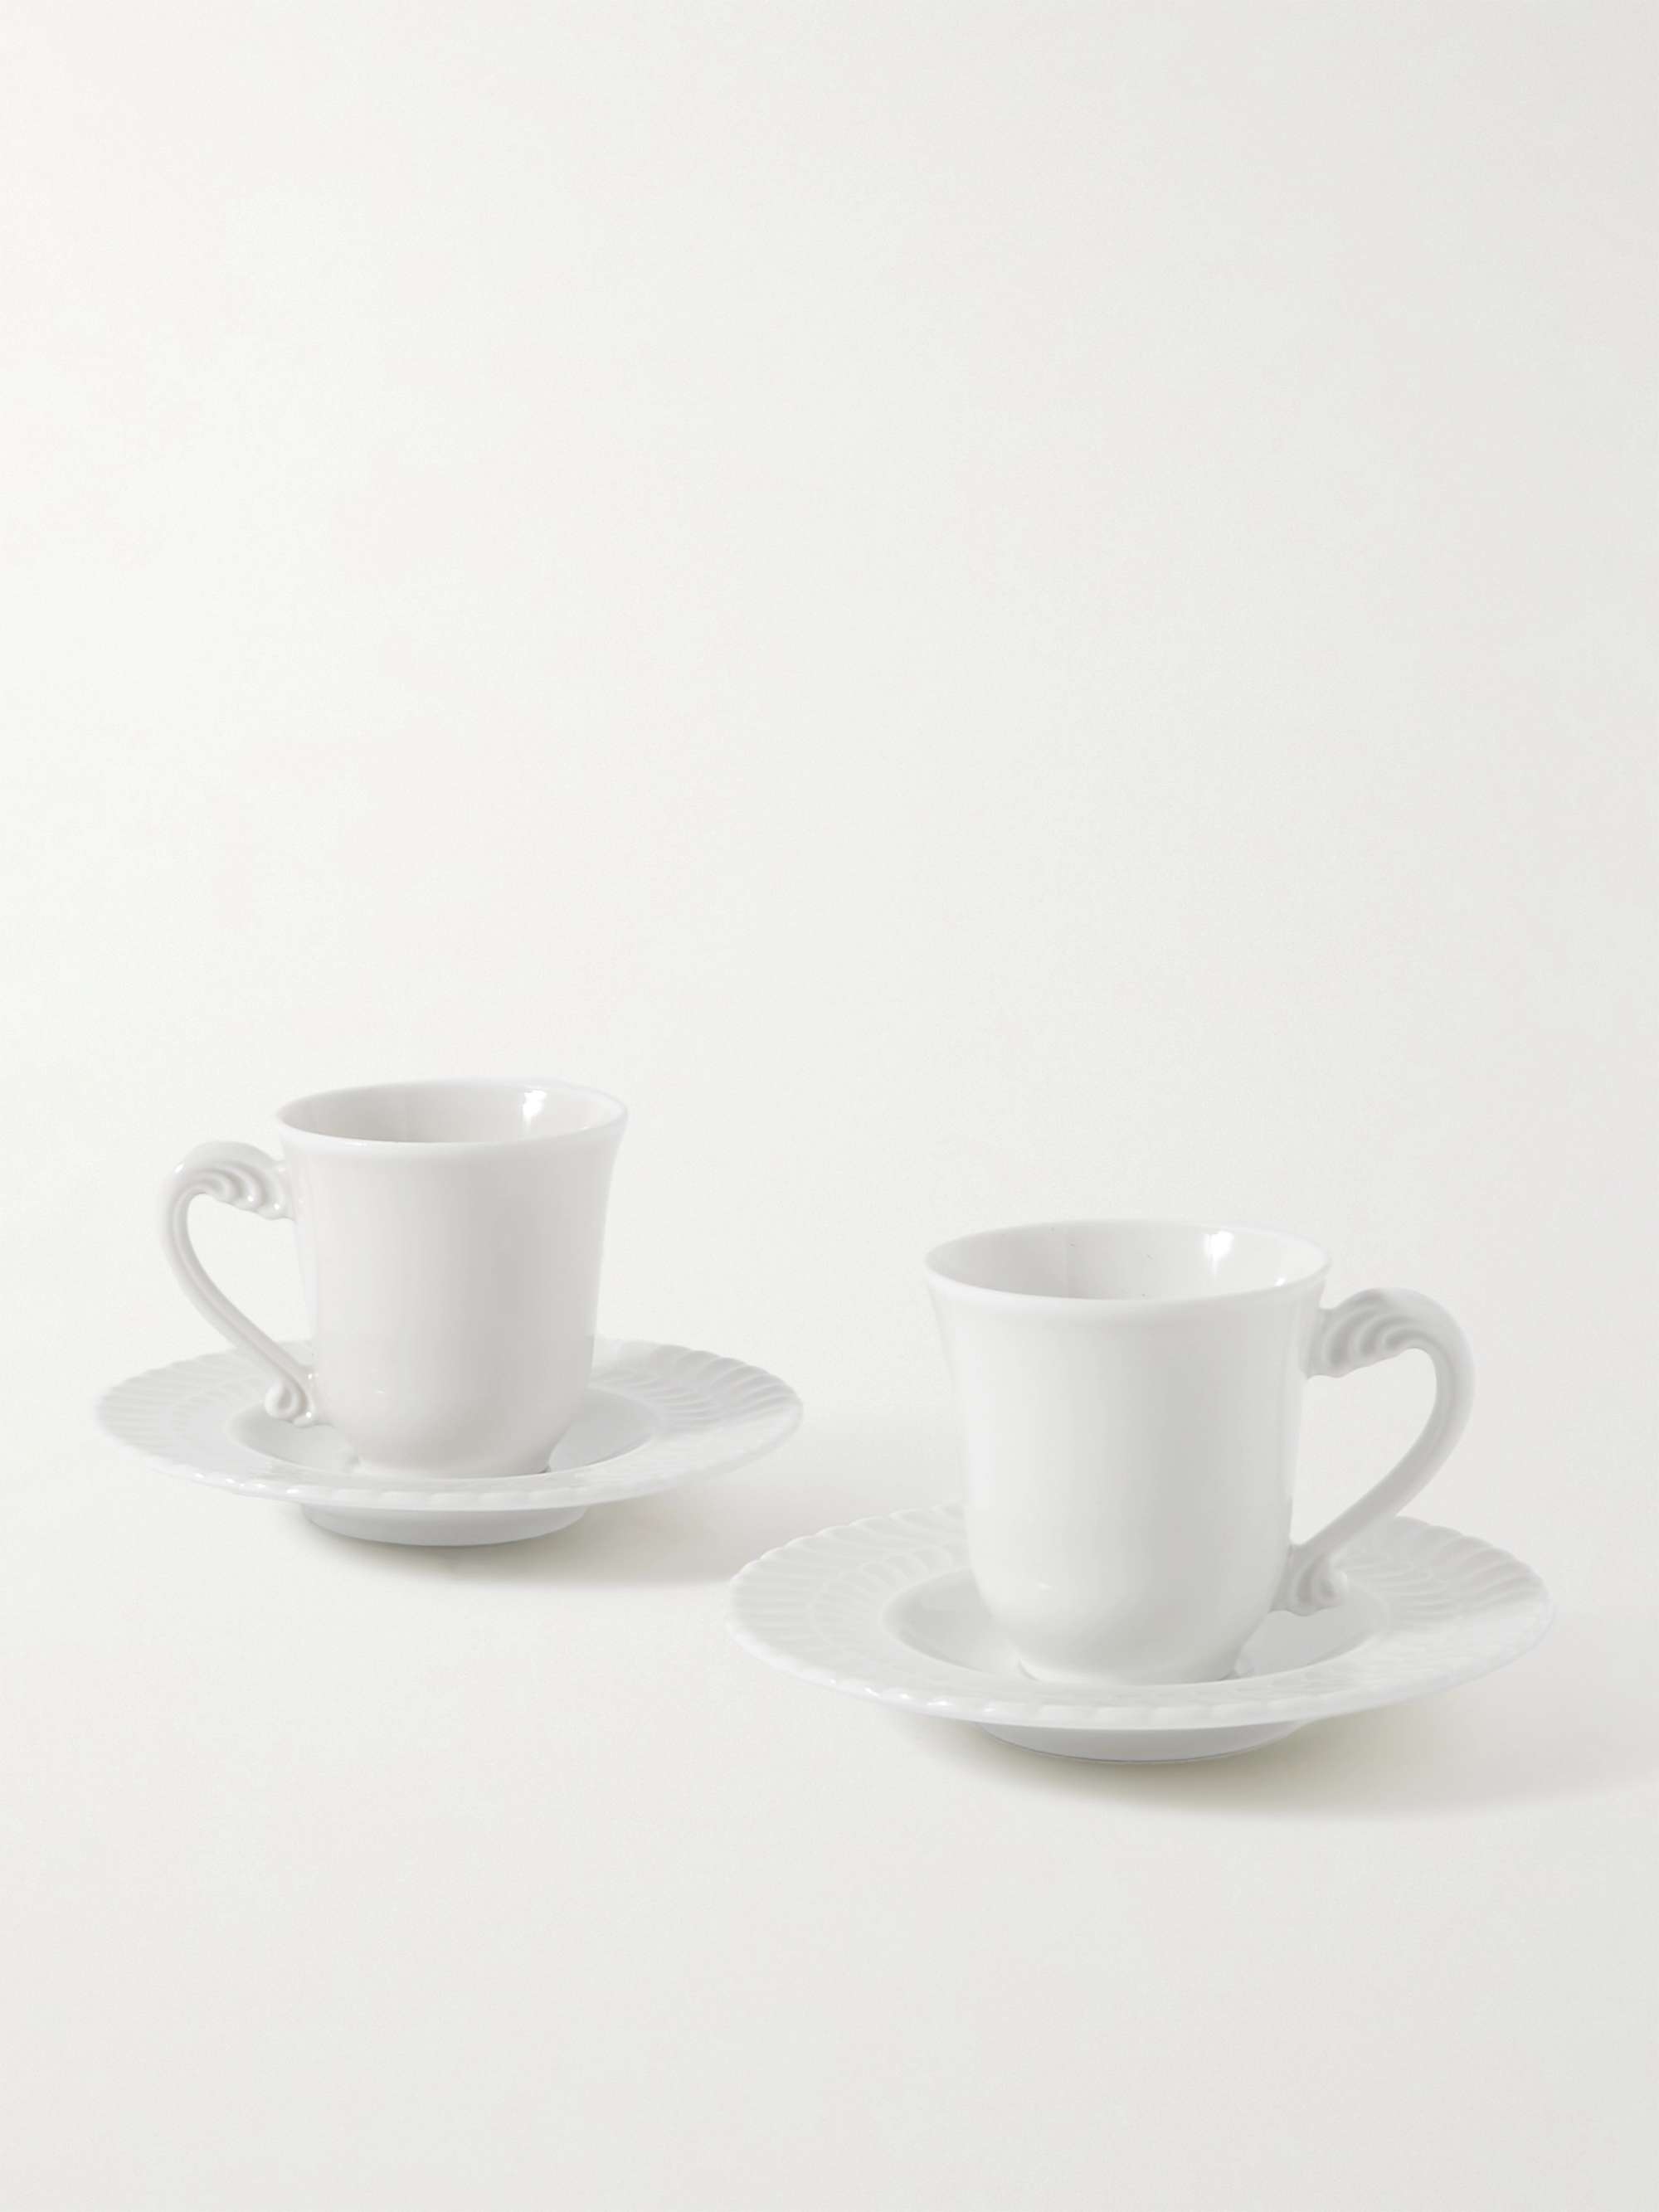 BUCCELLATI Porcelain Set of Two Espresso Cups and Saucers for Men